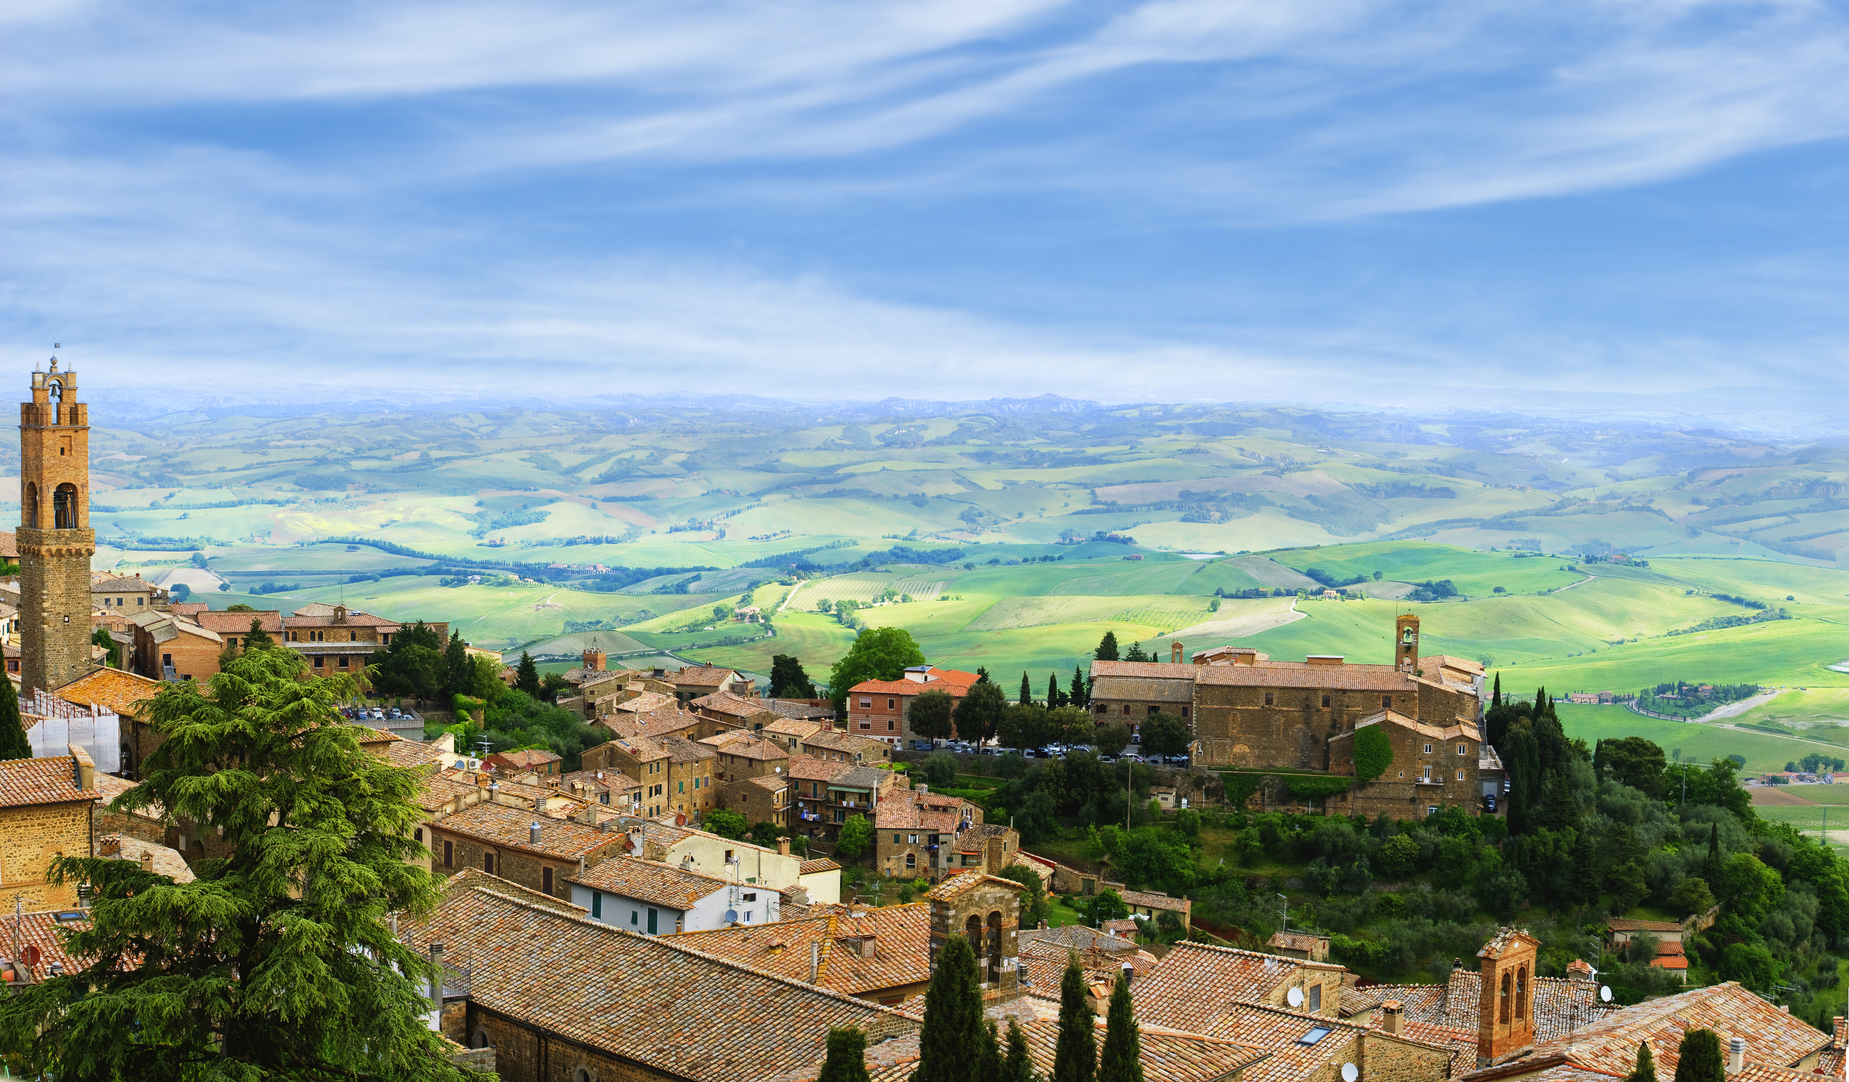 The ancient Italian town of Montalcino. Panoramic view from the city tower.